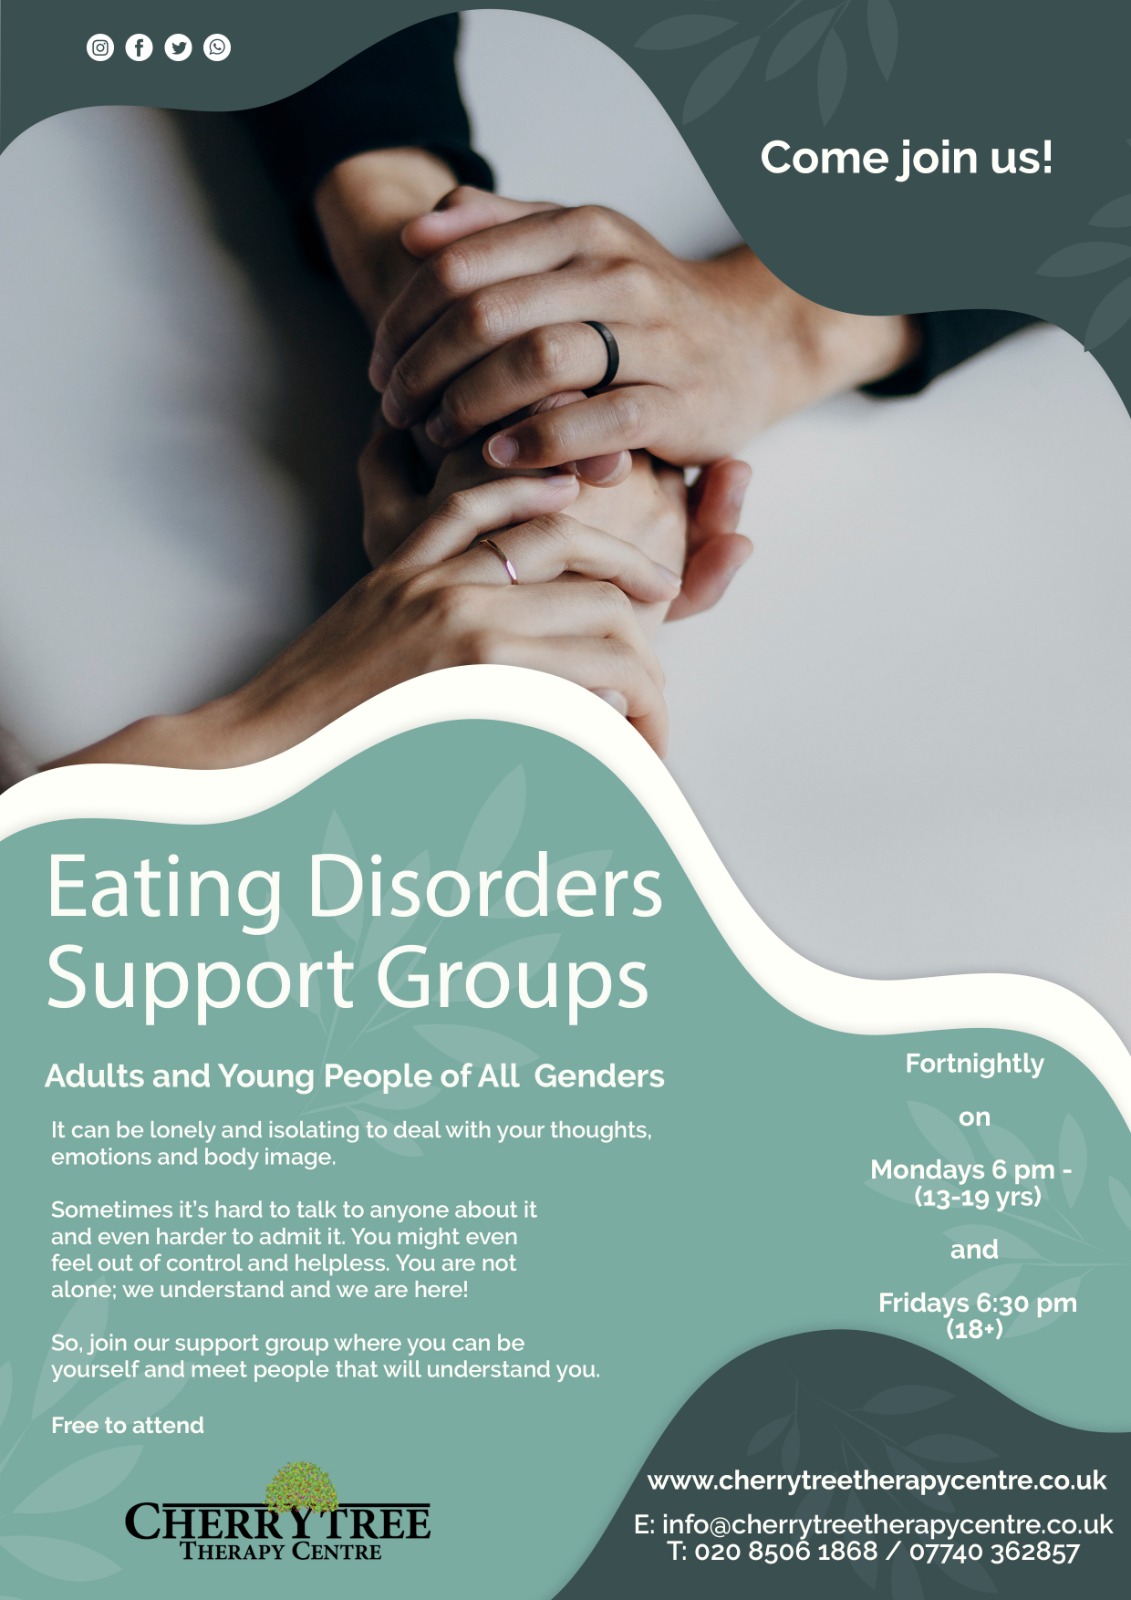 Eating disorders support group